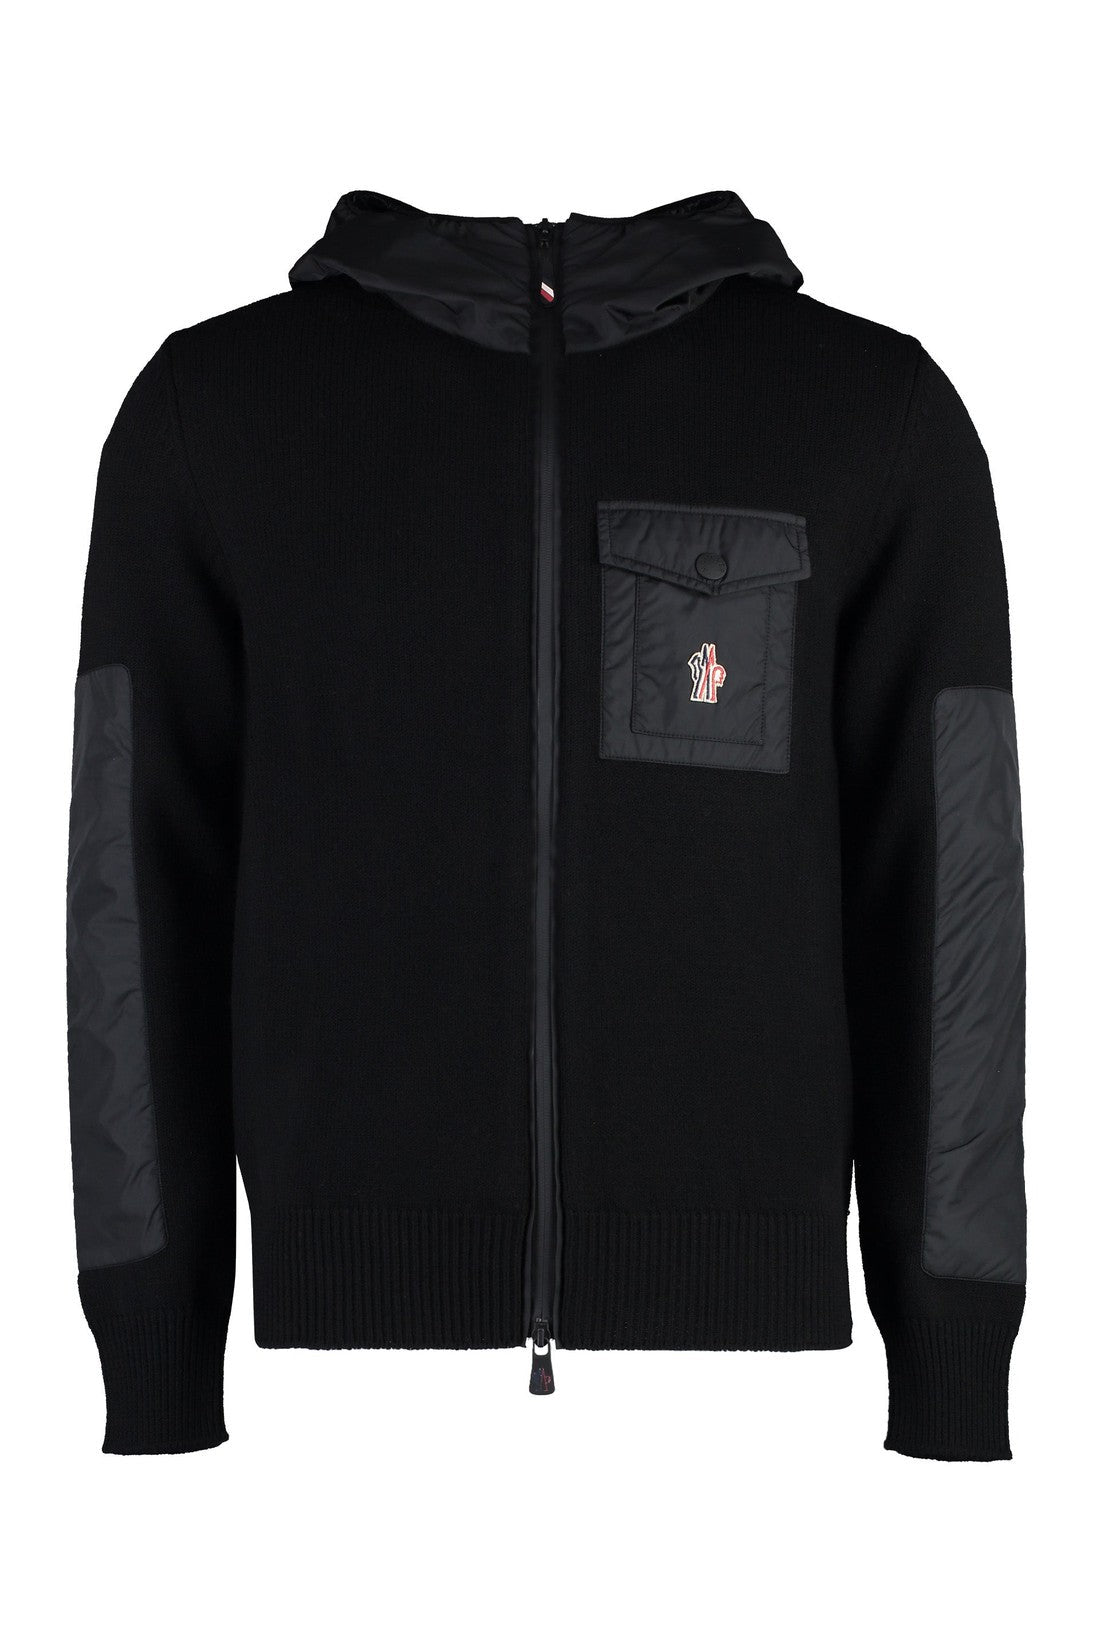 Moncler Grenoble-OUTLET-SALE-Cardigan zip and hood-ARCHIVIST